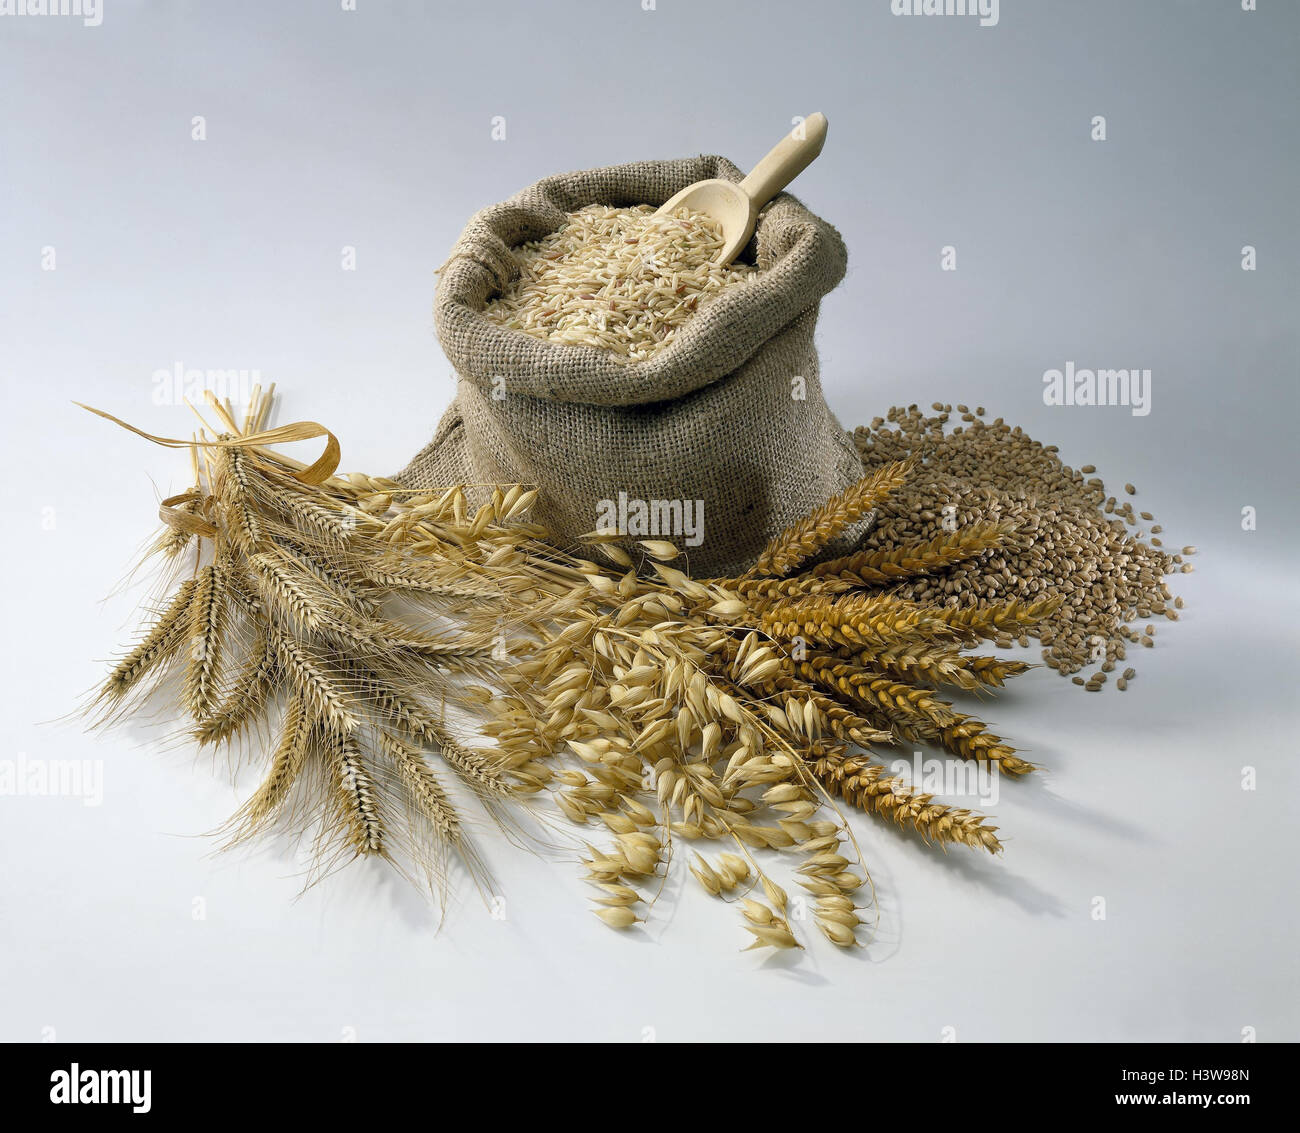 Grain, sorts, passed away, ears, jute pouch, travel cereals, grain sorts, grain ears, roughage, cultivated plants, Still life, product photography Stock Photo